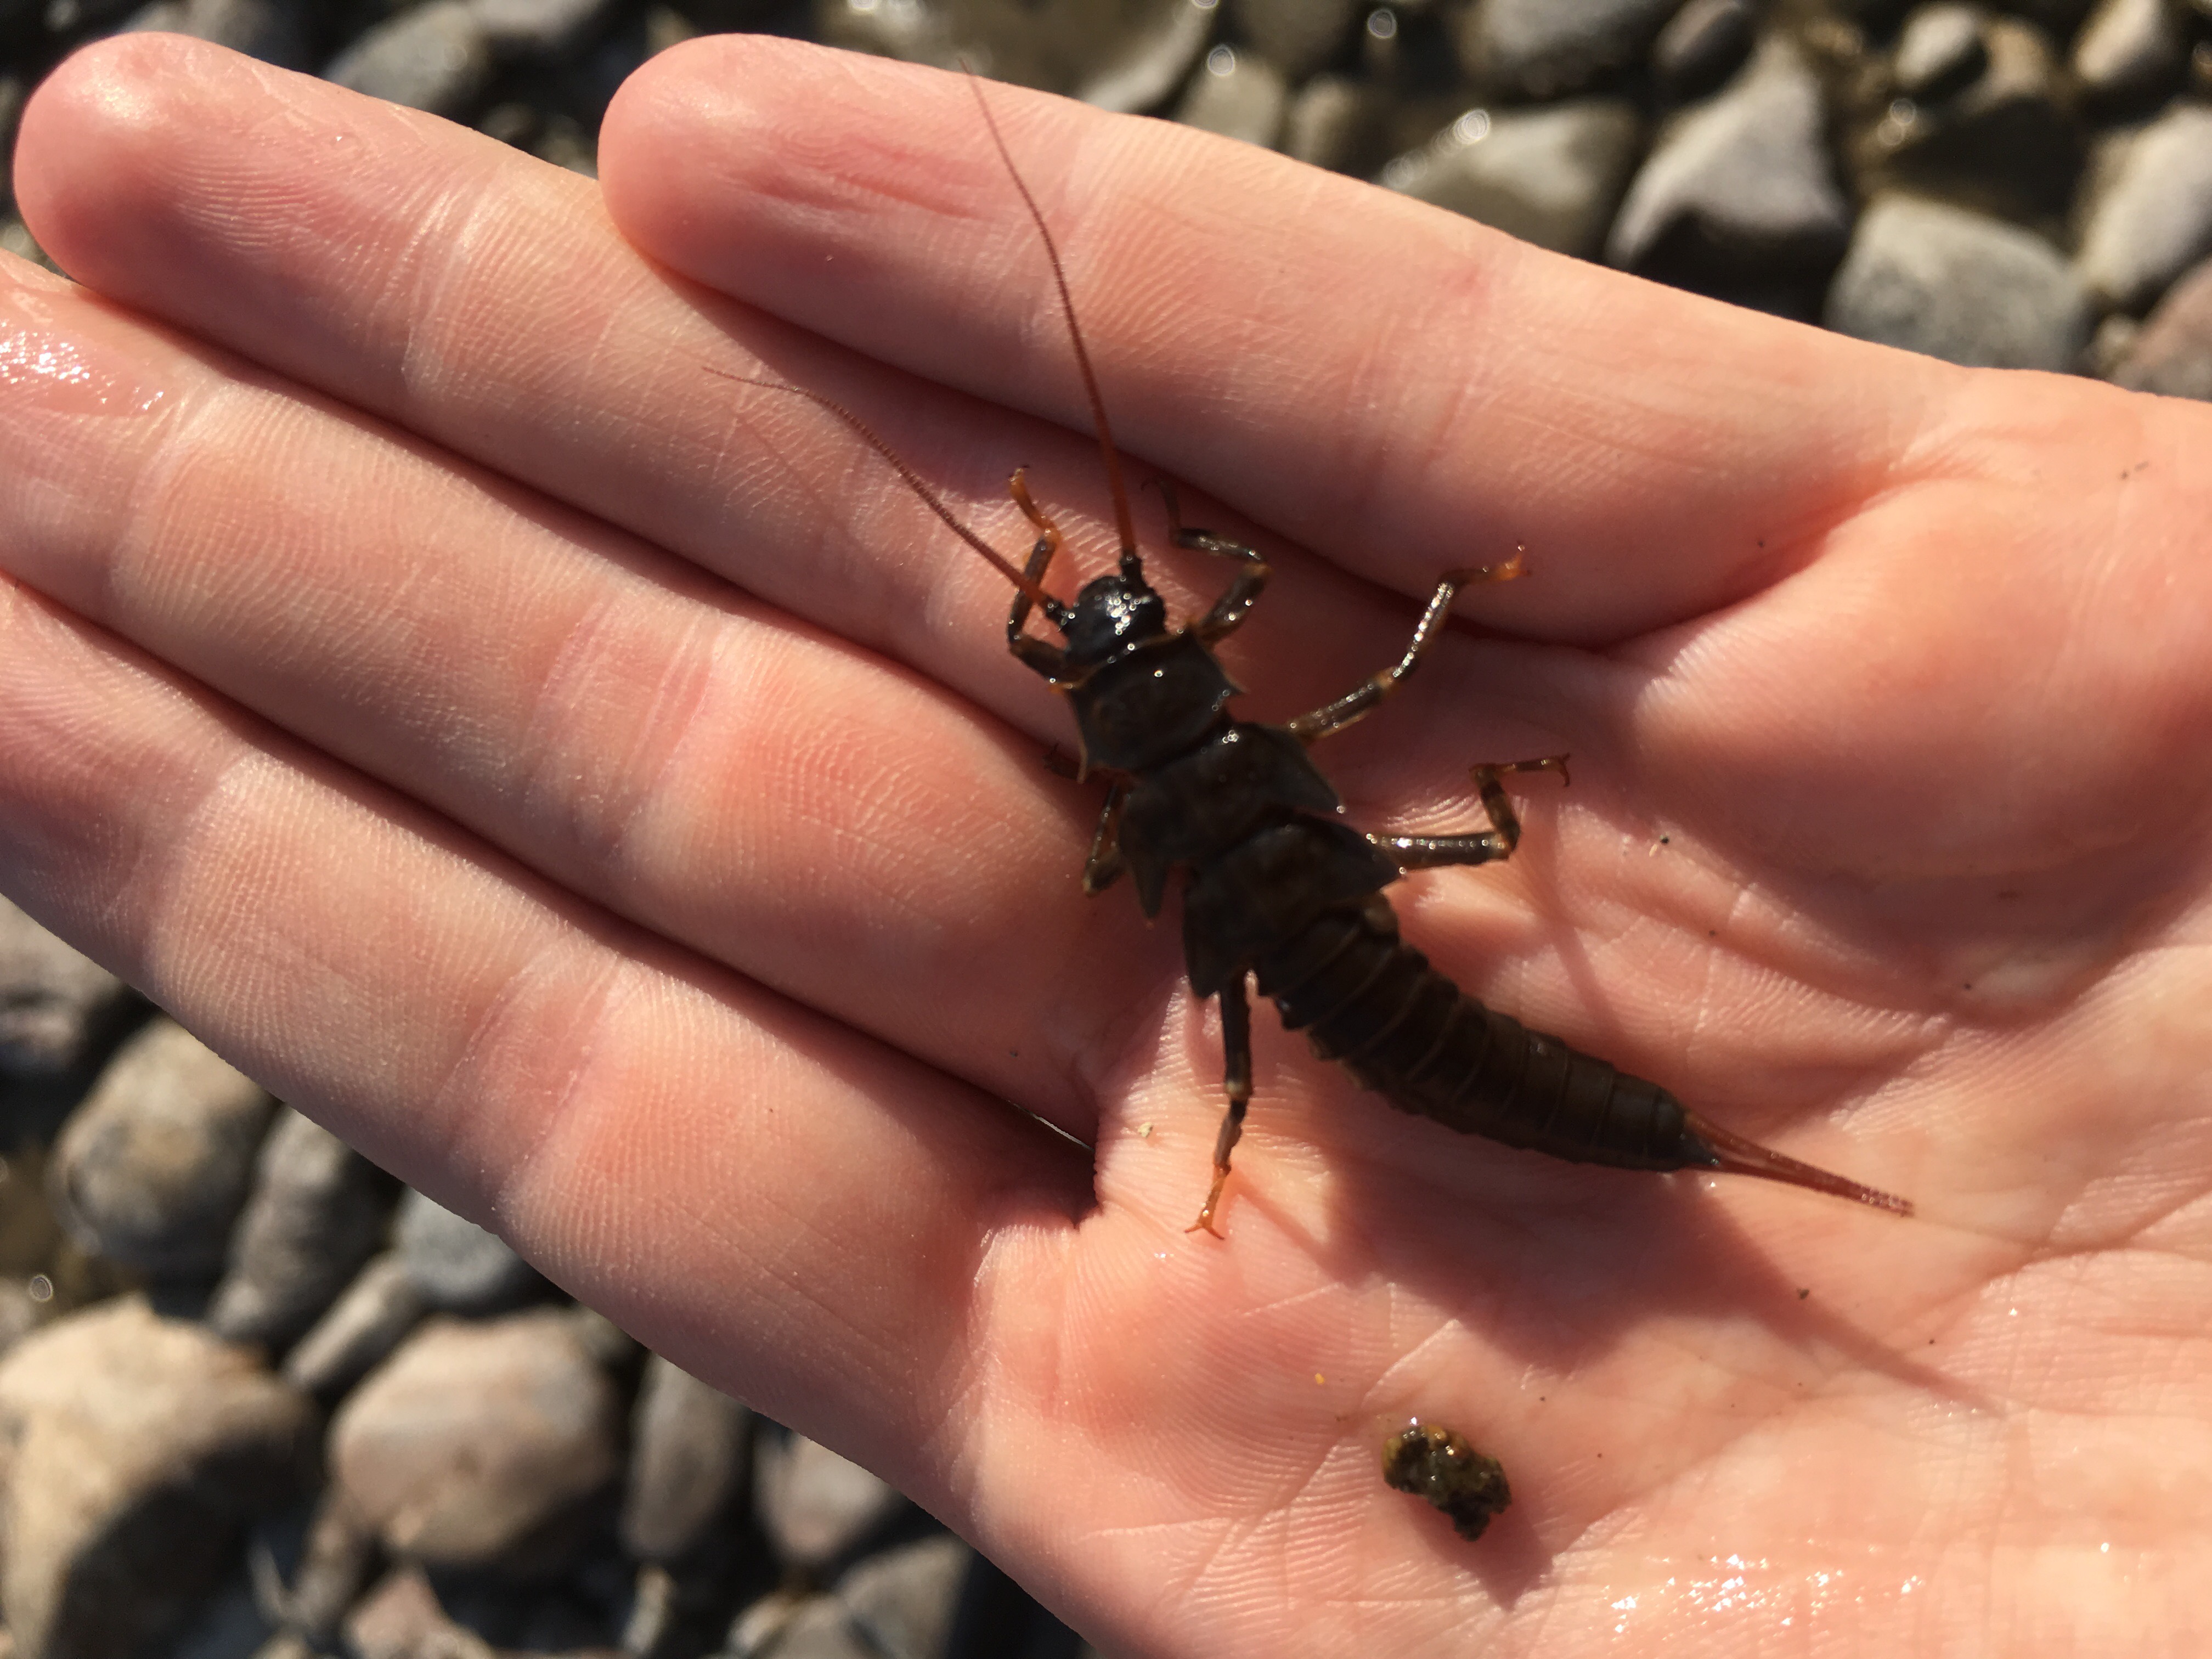 Stonefly pumped from a Nyack well